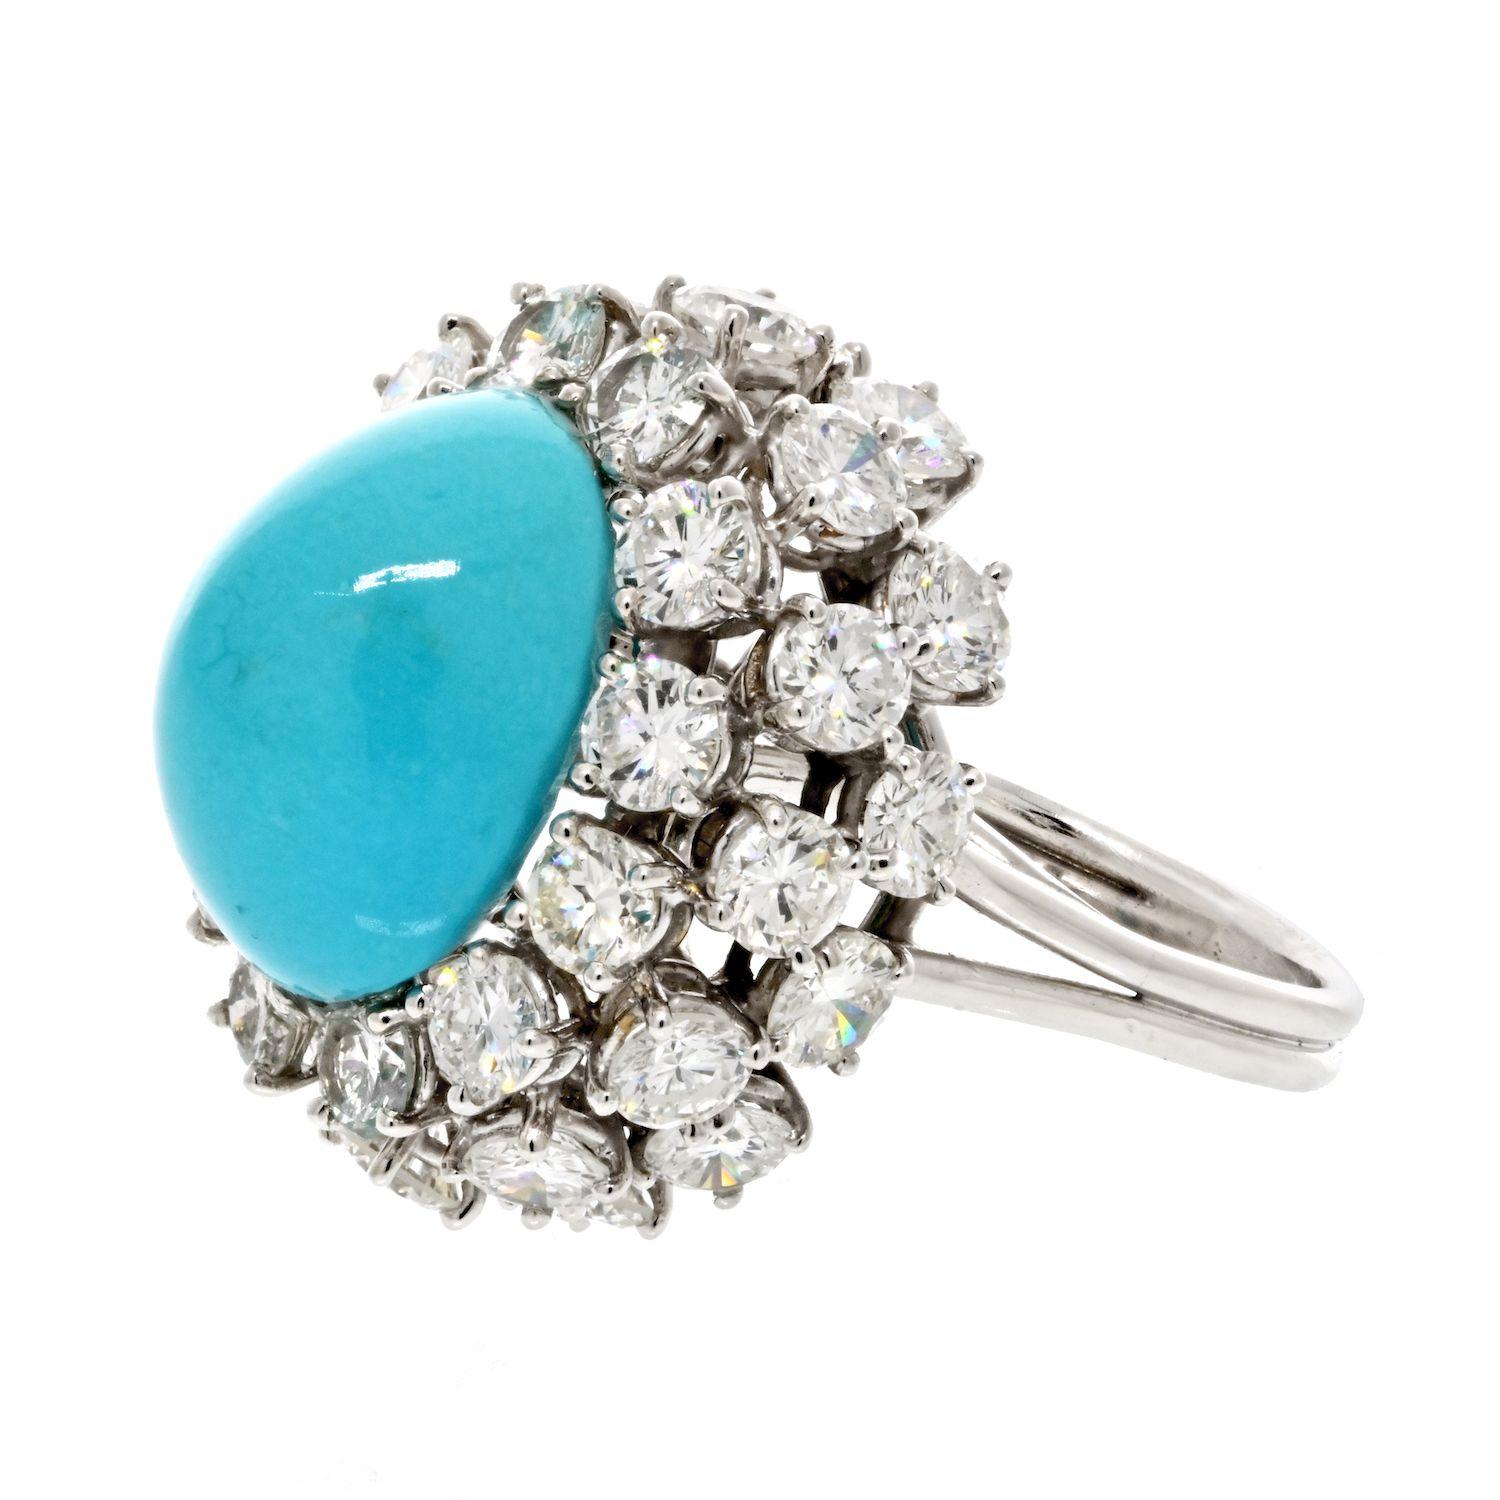 The Platinum 1960's Diamond and Cabochon Cut Turquoise Cocktail Ring is a captivating vintage piece that combines the allure of diamonds with the vibrant beauty of turquoise. Crafted in platinum, this ring showcases a remarkable cabochon cut